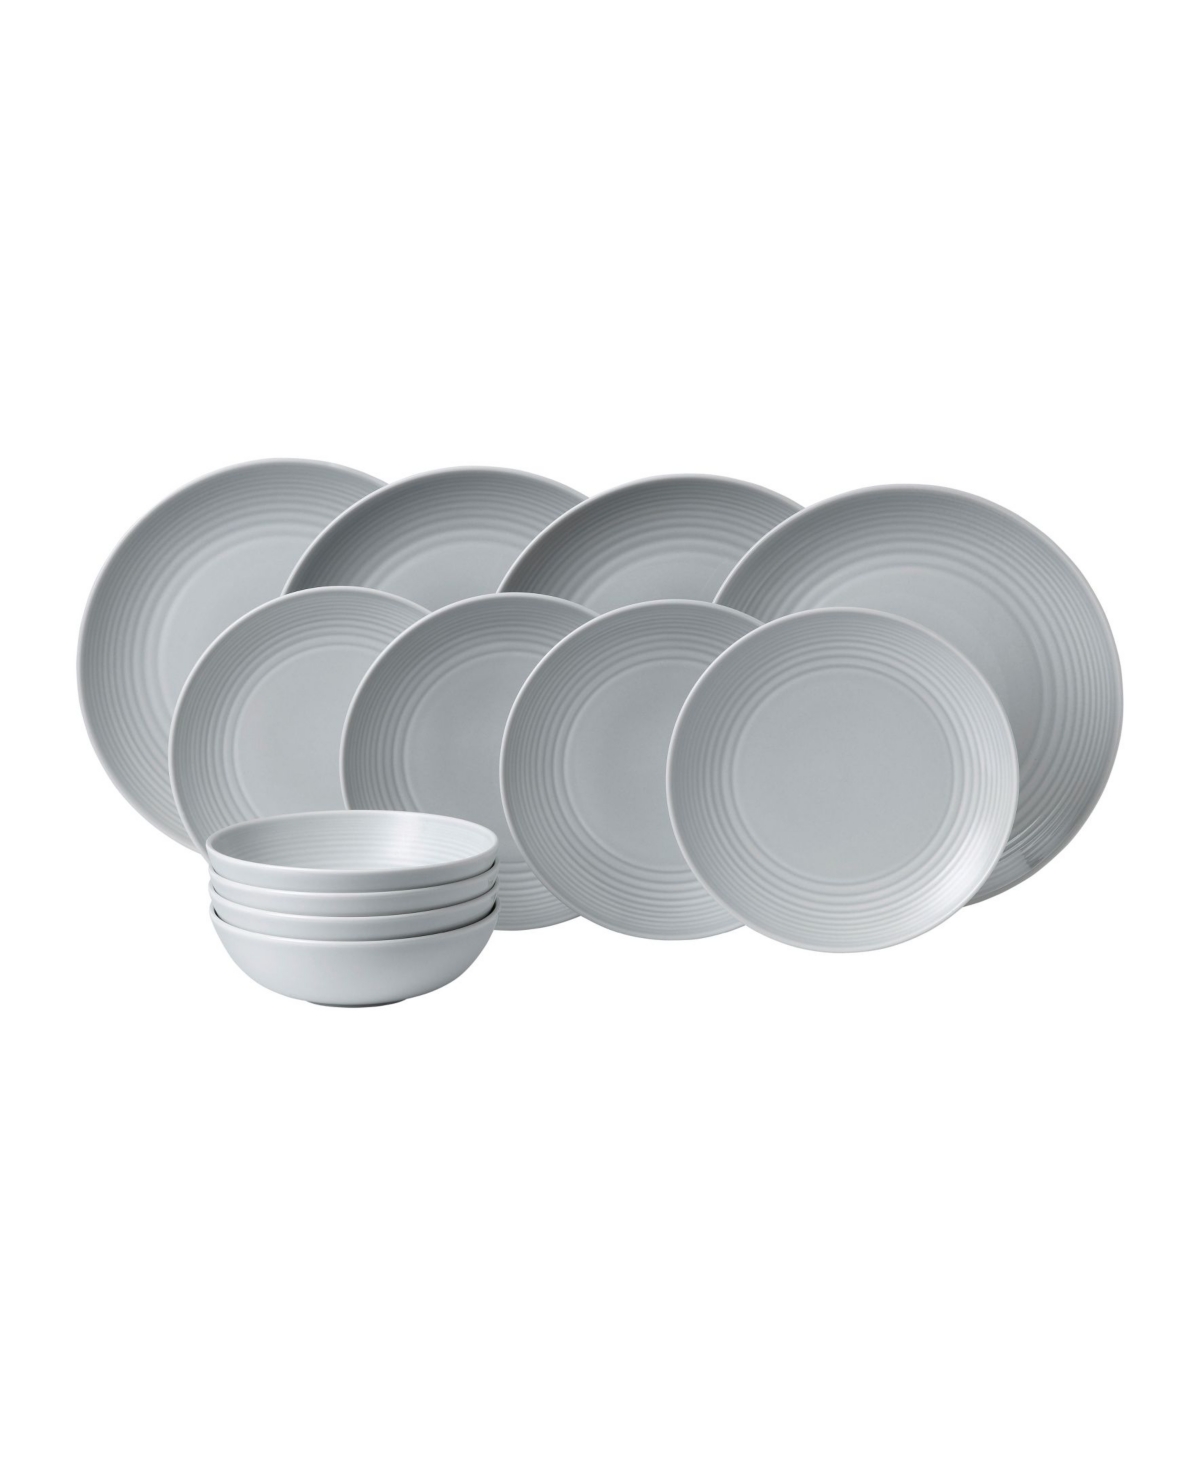 Exclusively for Gordon Ramsay Maze 12-Piece Dinner Set - Gray